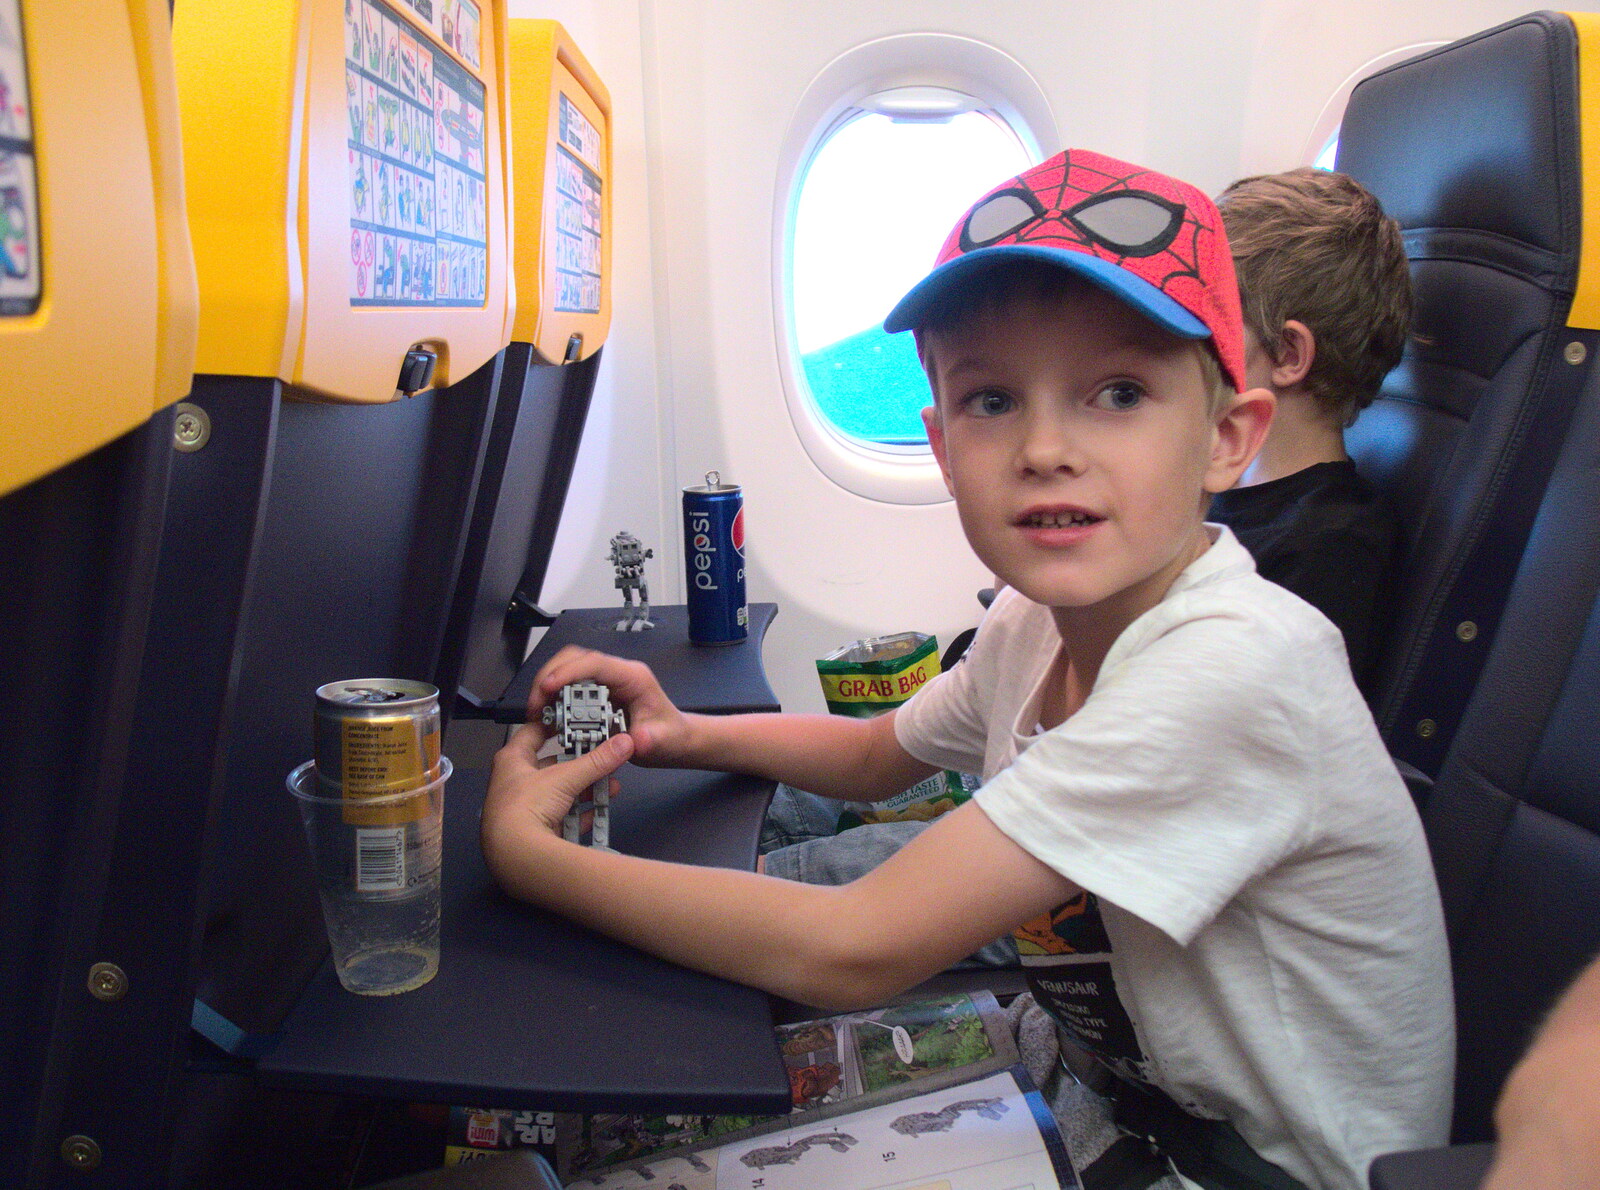 Harry's built his Lego thing on the plane from A Trip to Da Gorls, Monkstown Farm, County Dublin, Ireland - 4th August 2018